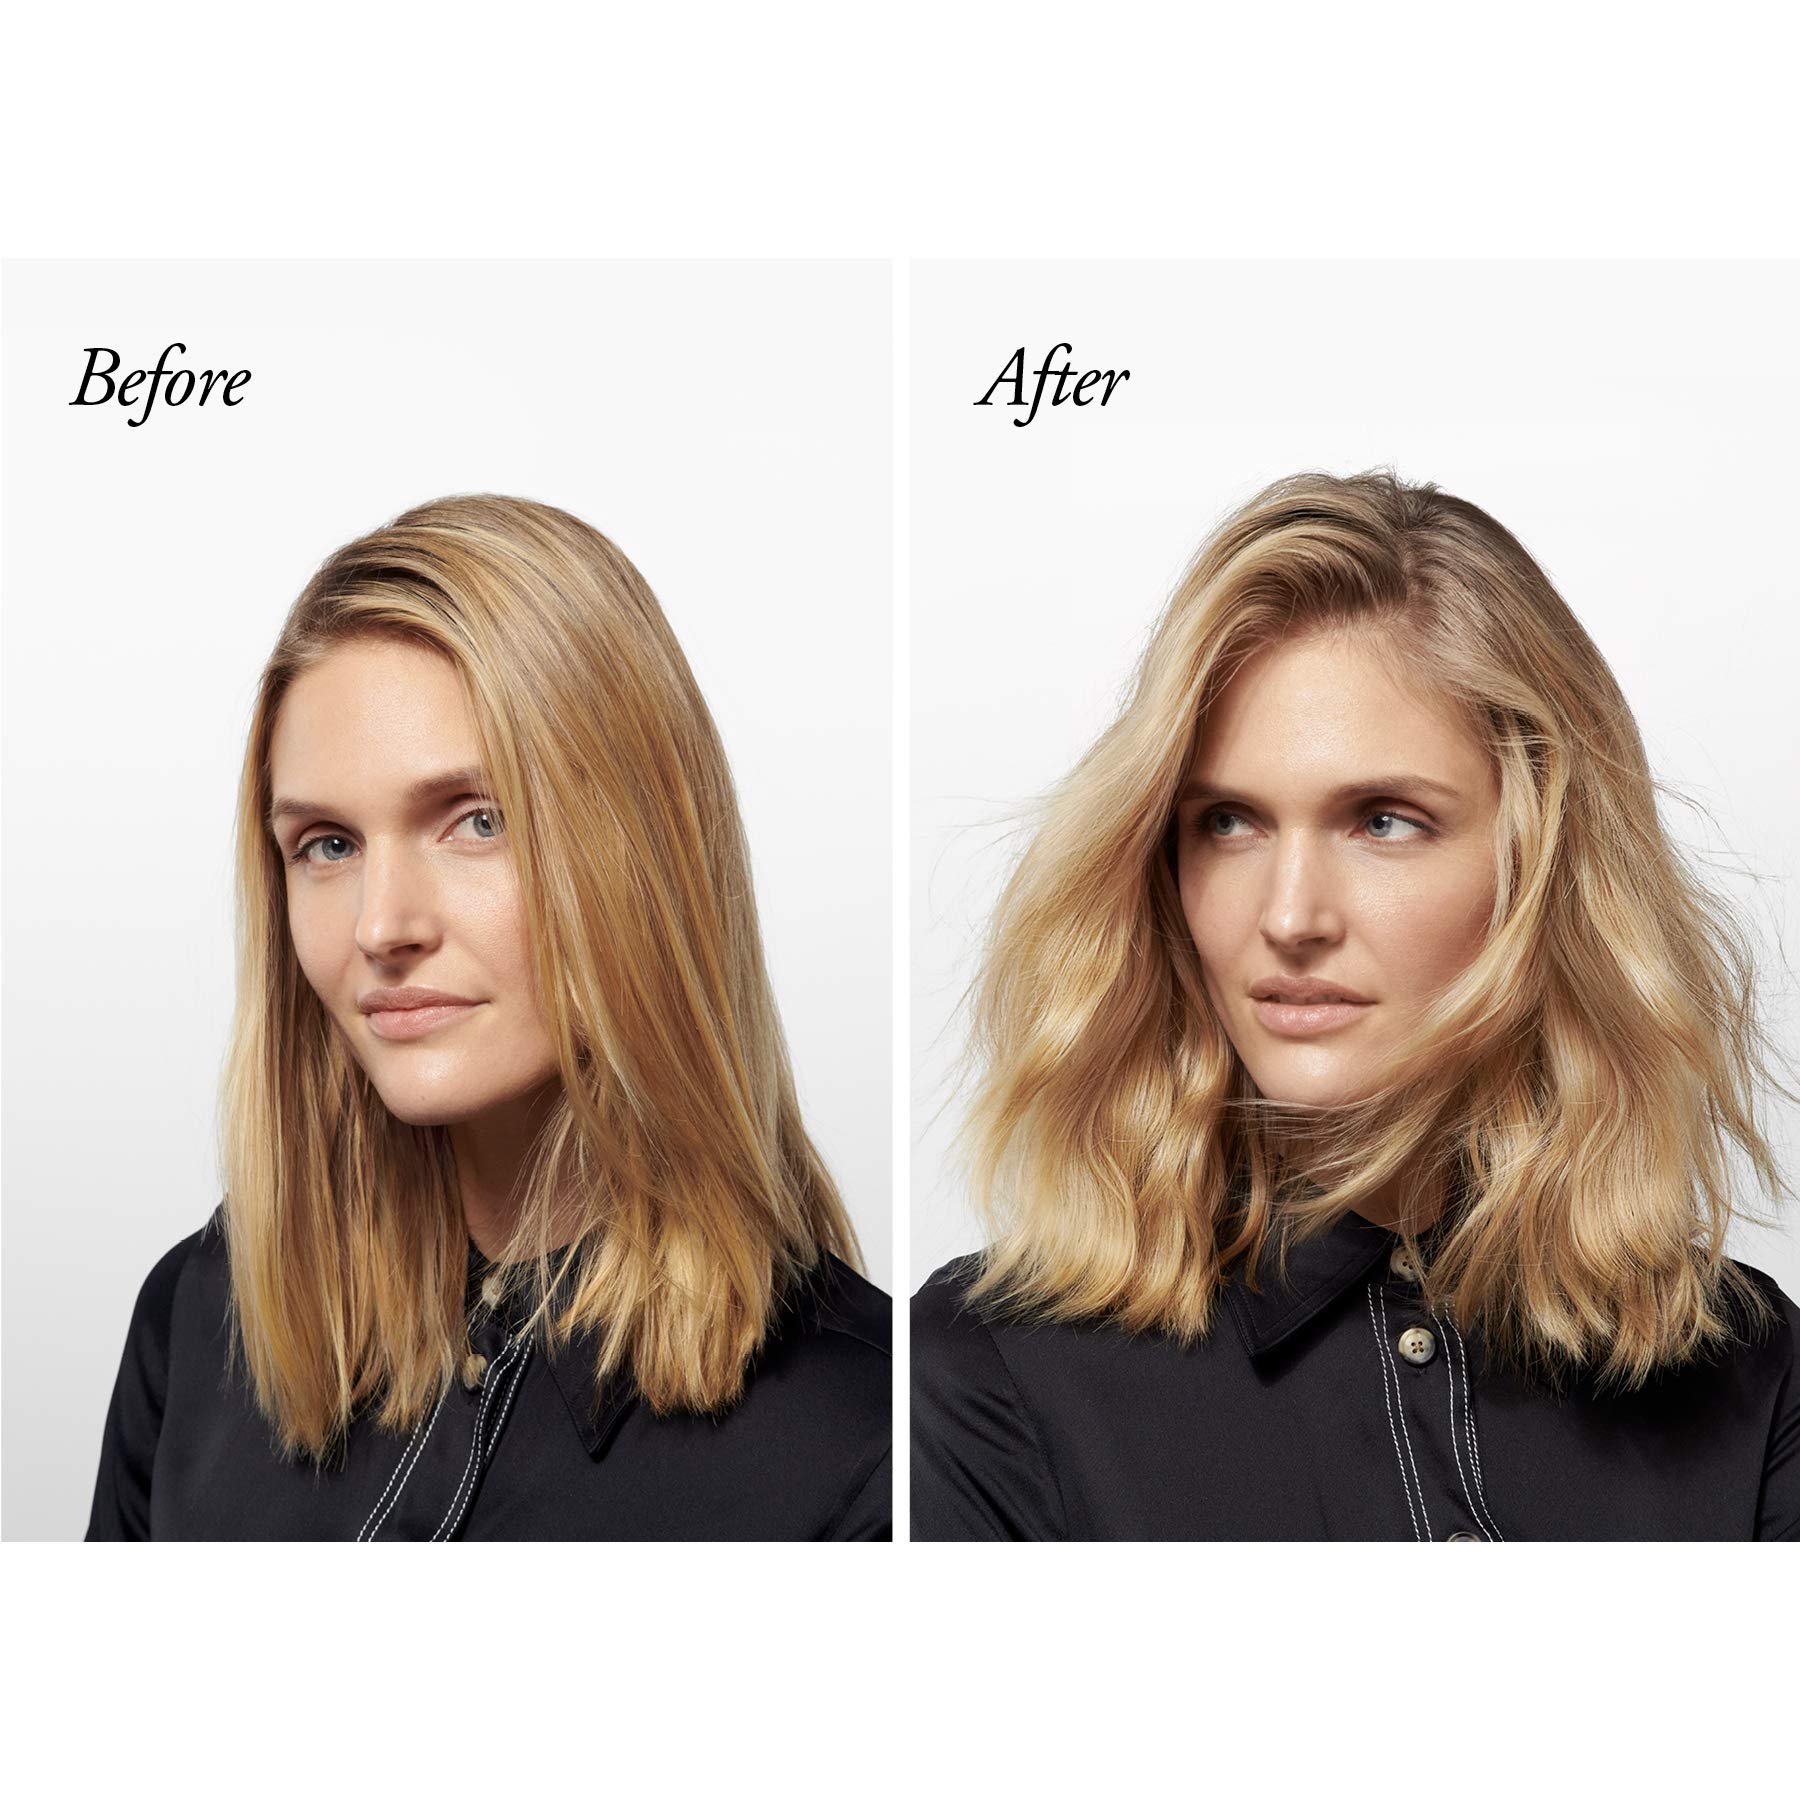 Oribe Dry Texturizing Hairspray before and after